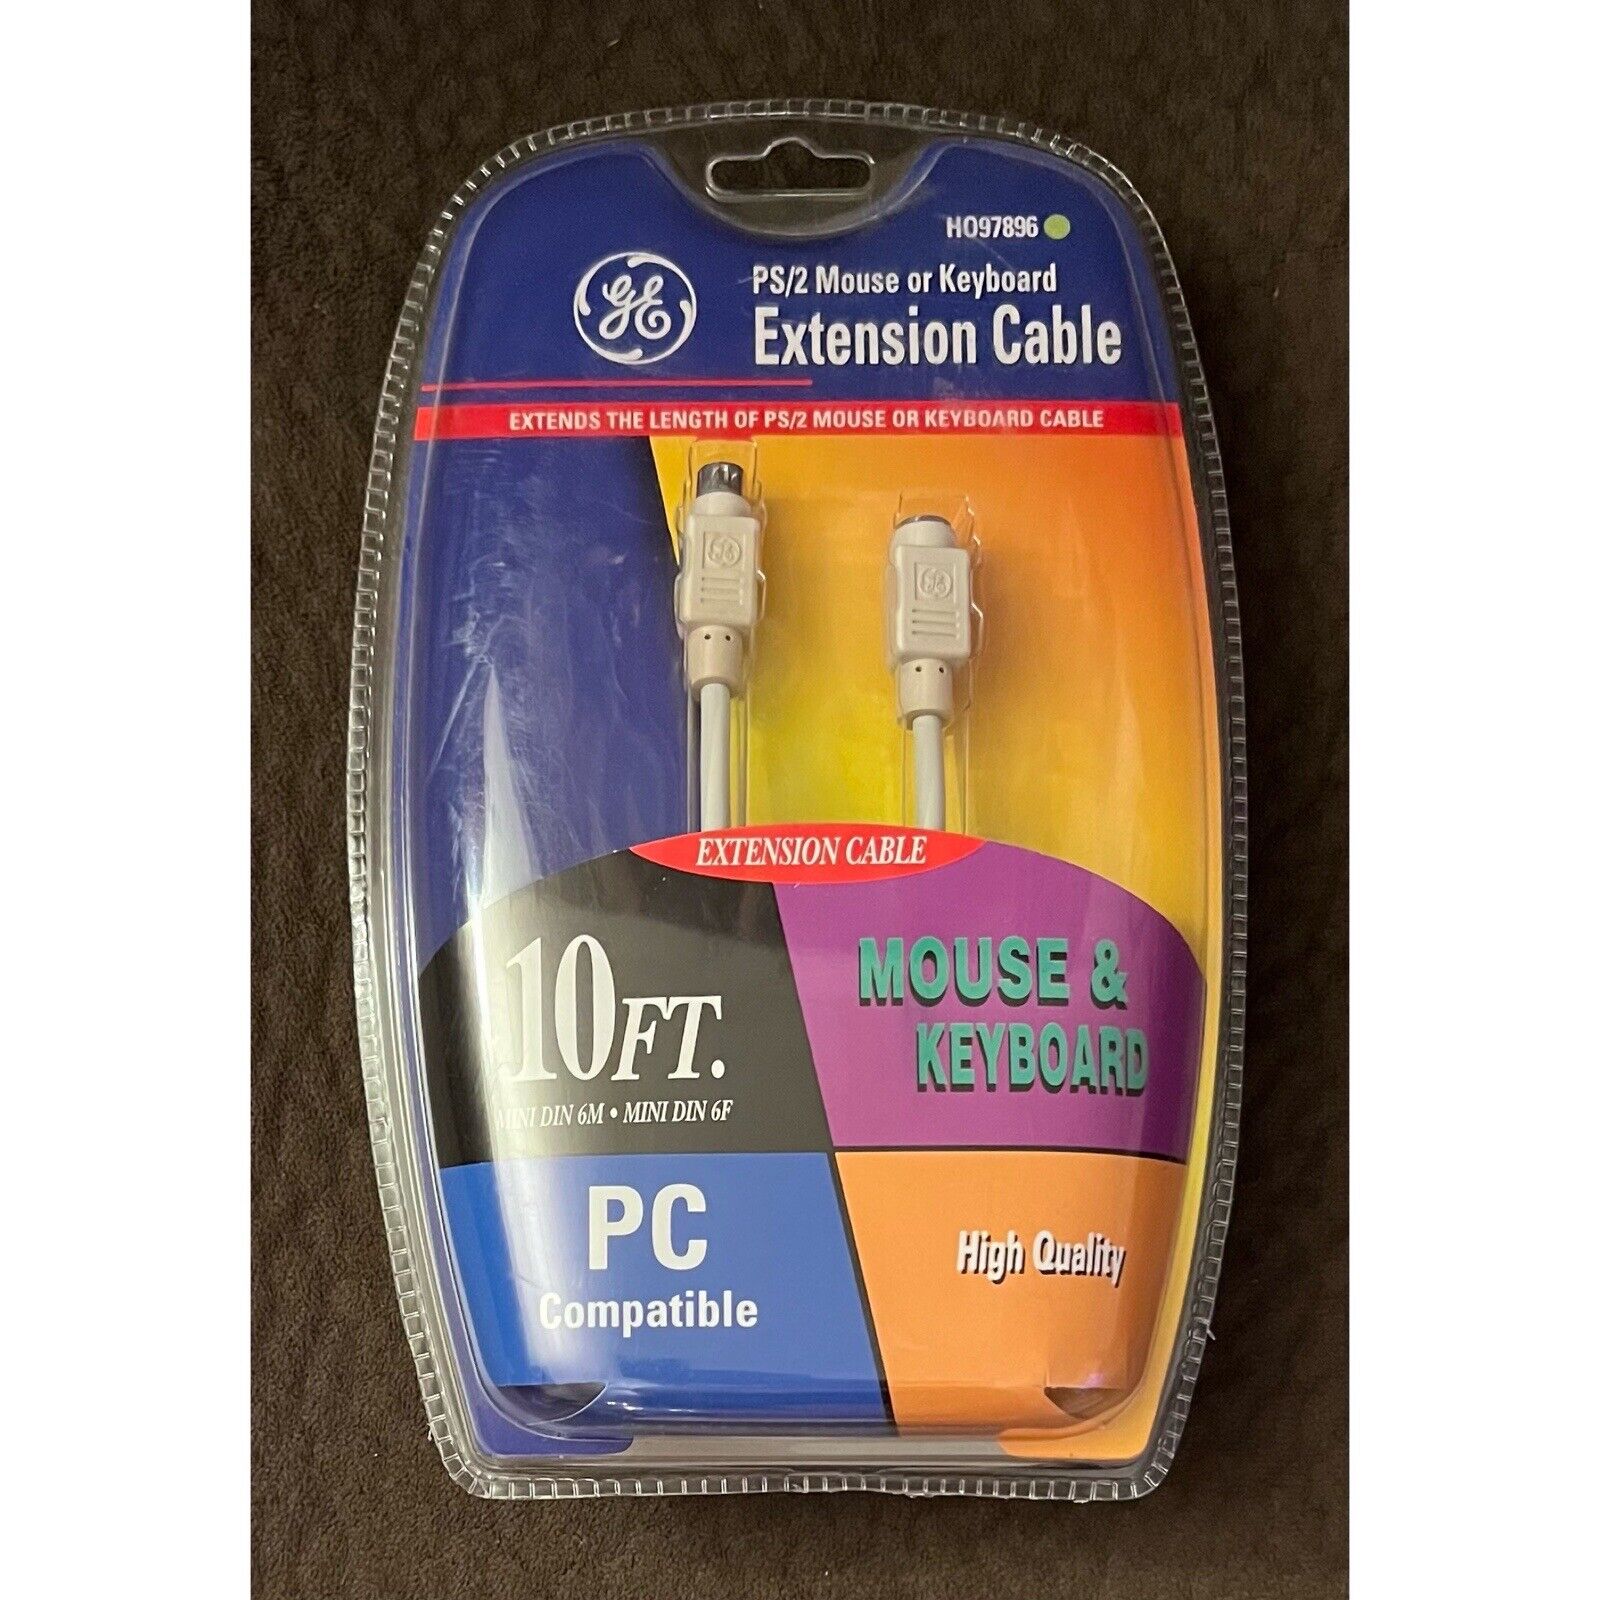 NEW GE 10 Feet PS/2 Mouse & Keyboard Extension Cable HO97896 PC Compatible